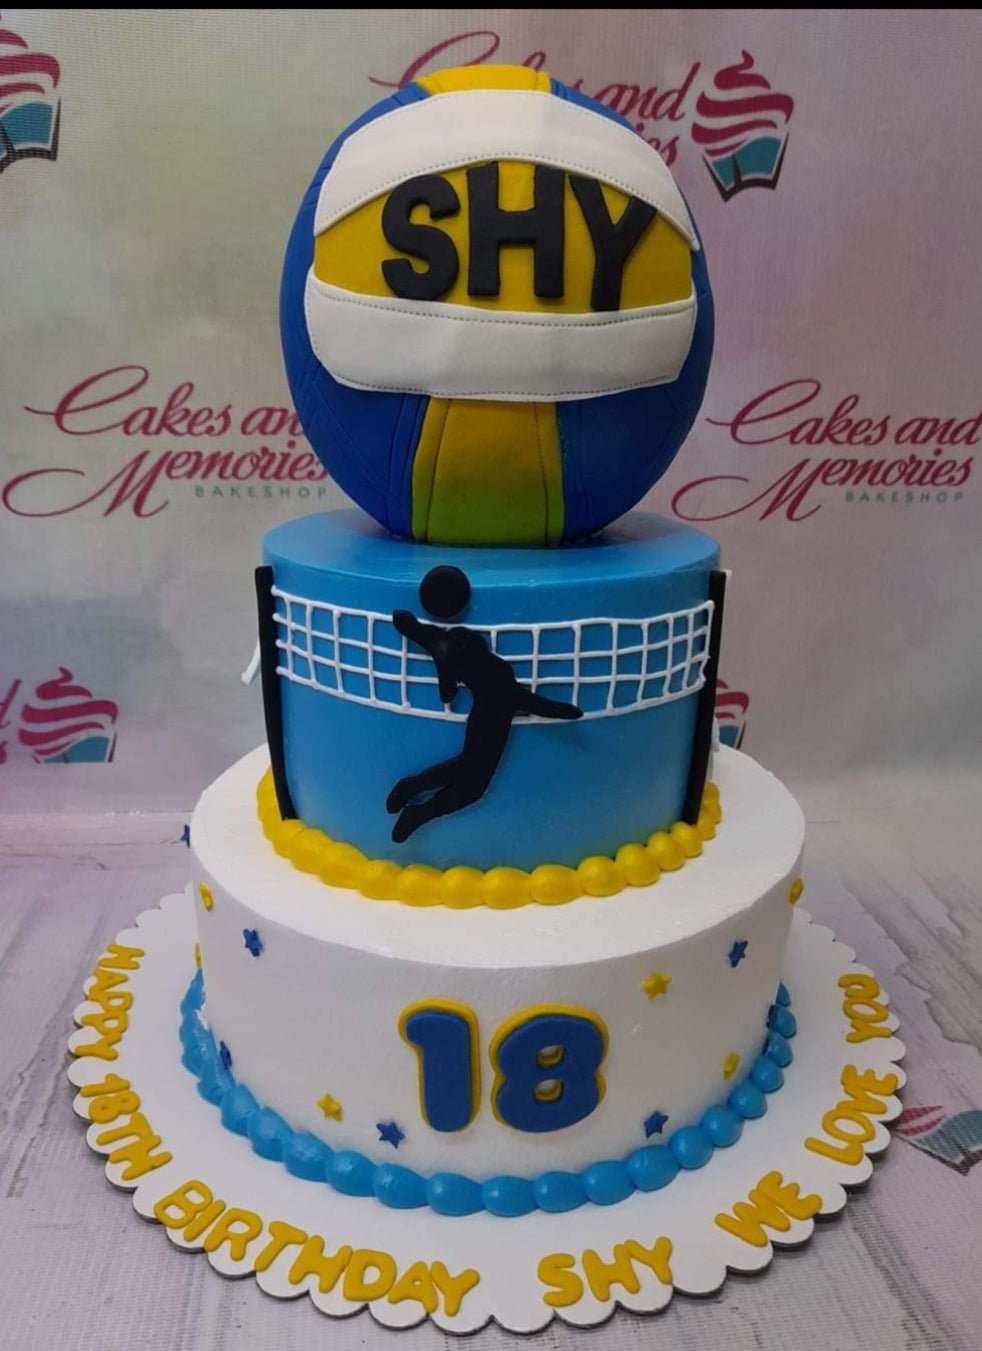 Volleyball Cake - 2102 – Cakes and Memories Bakeshop